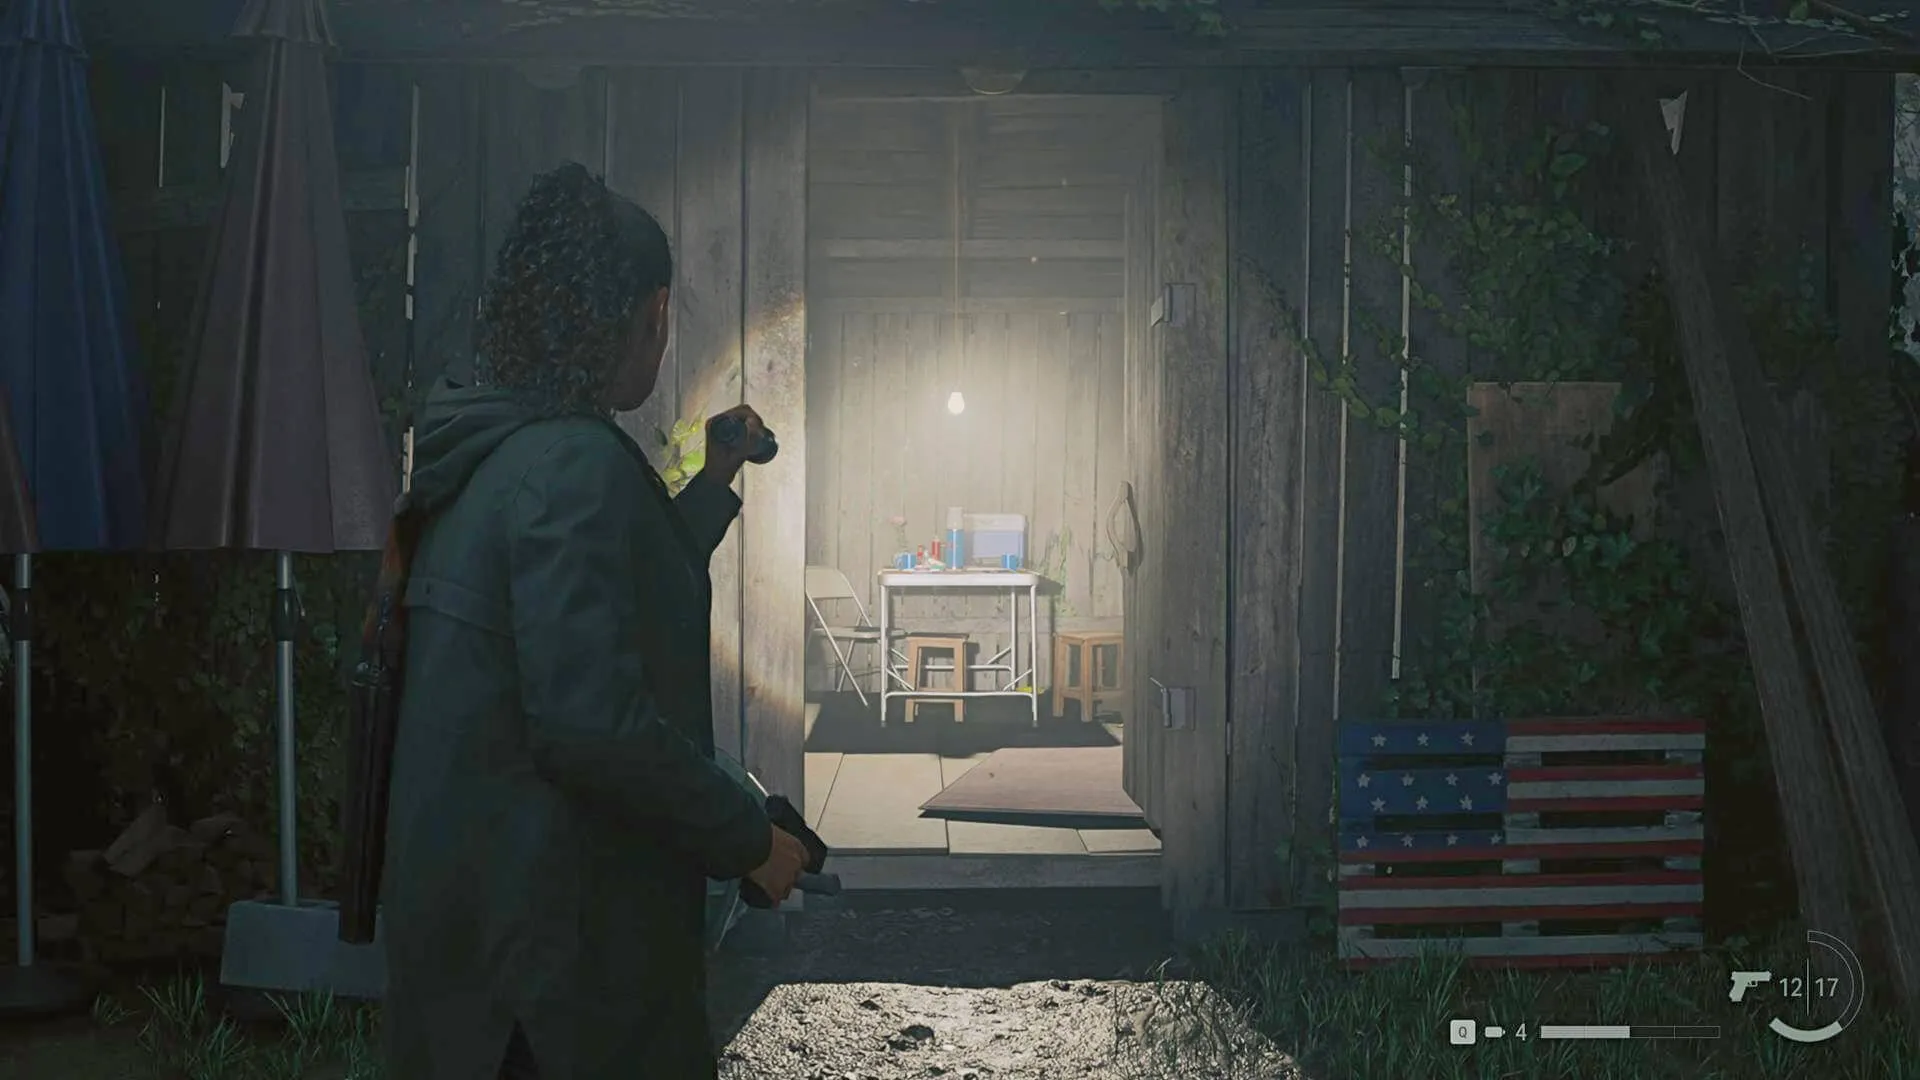 Alan Wake 2 Confirms All Difficulty Modes and New Game Plus for the Sequel  - EssentiallySports